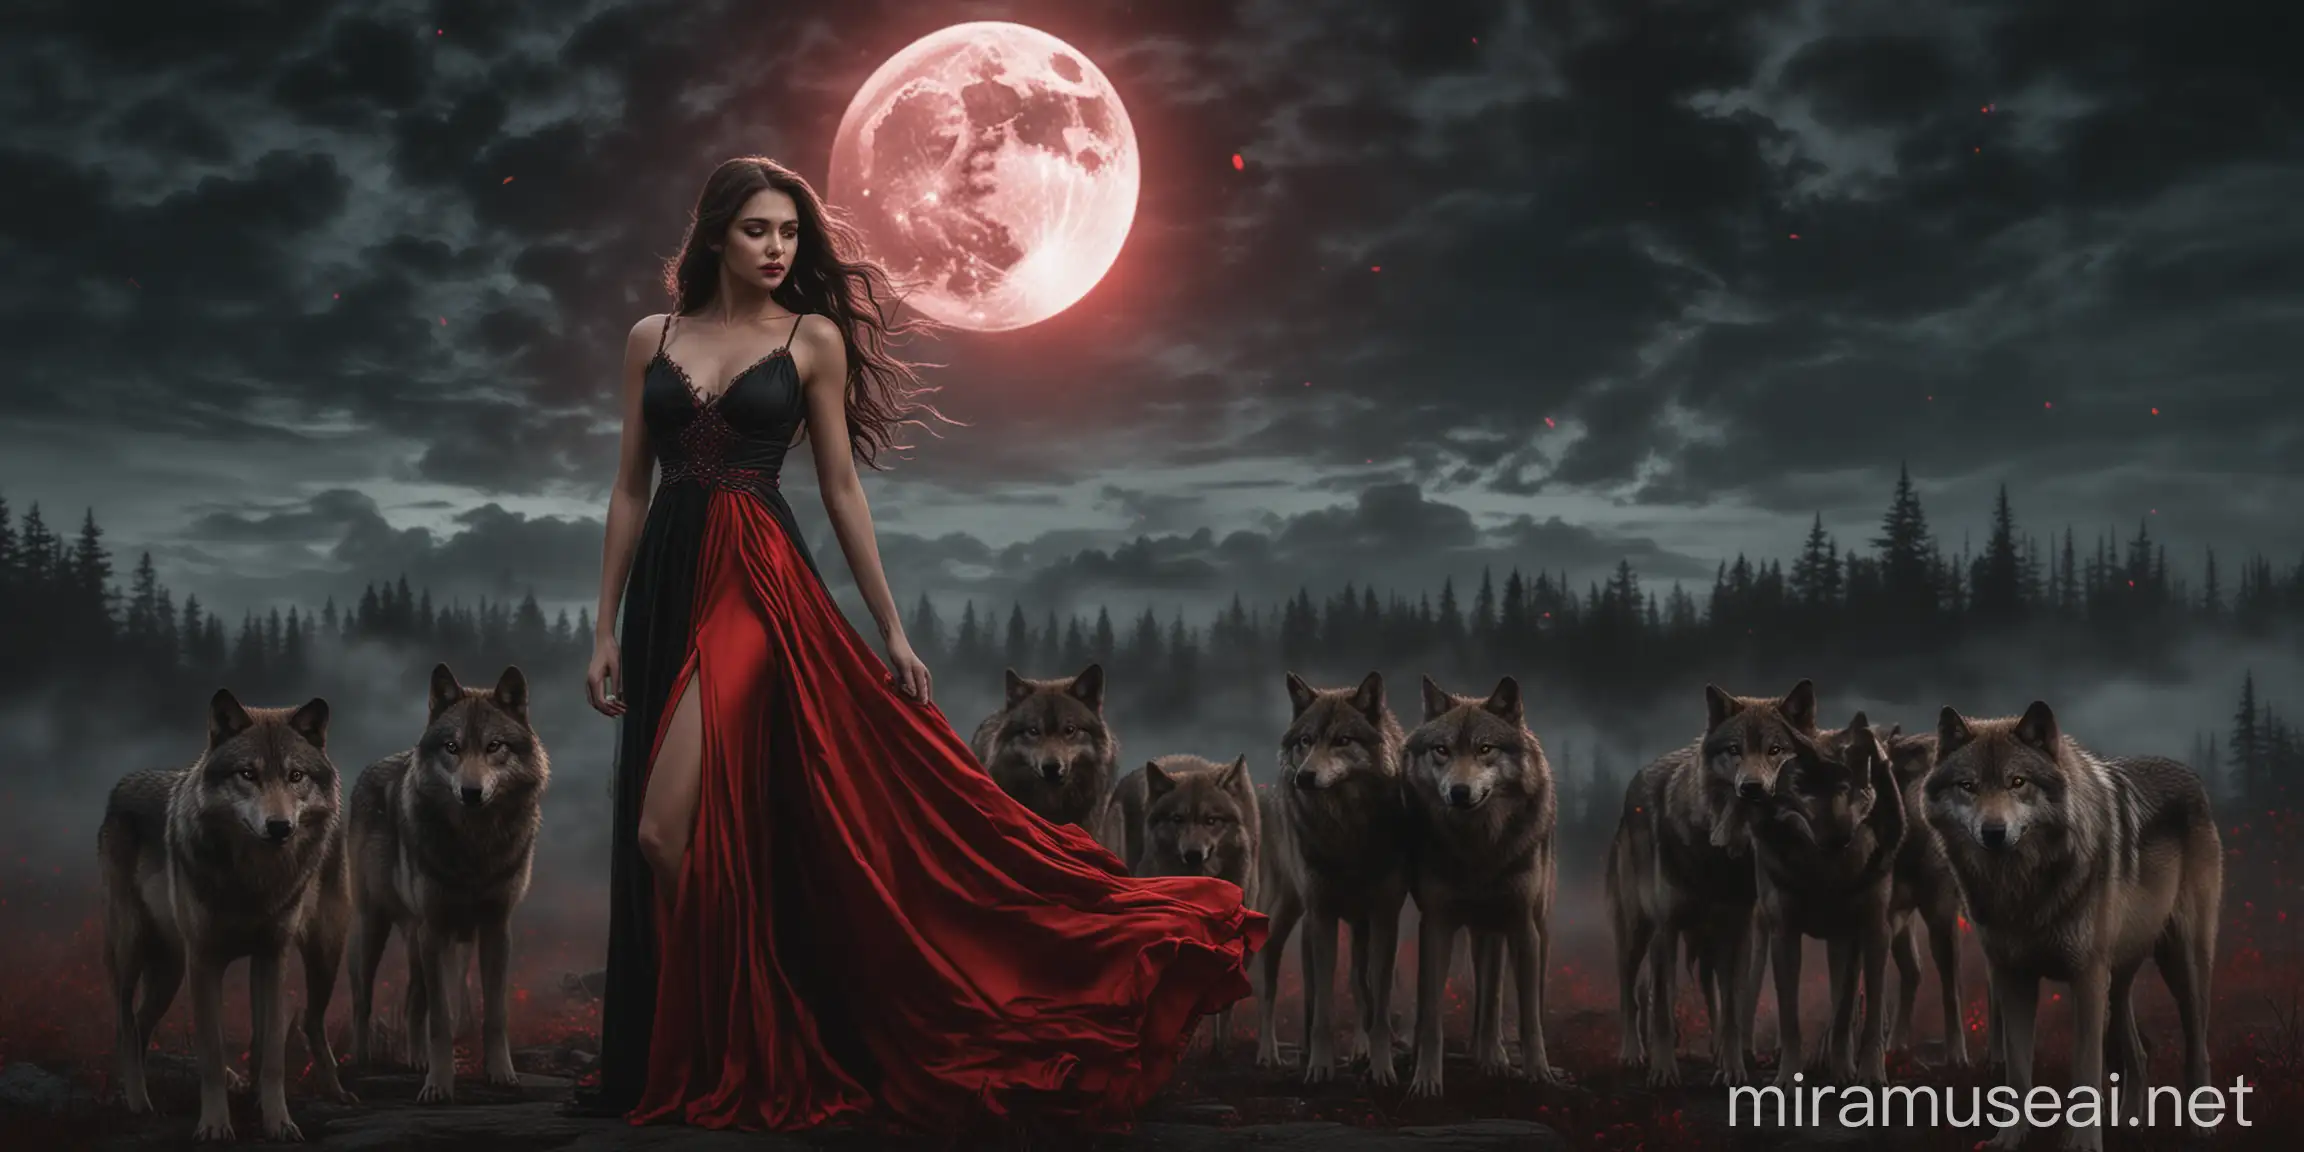 Enchanting Woman in Red and Black Dress with Wolves under Moonlight